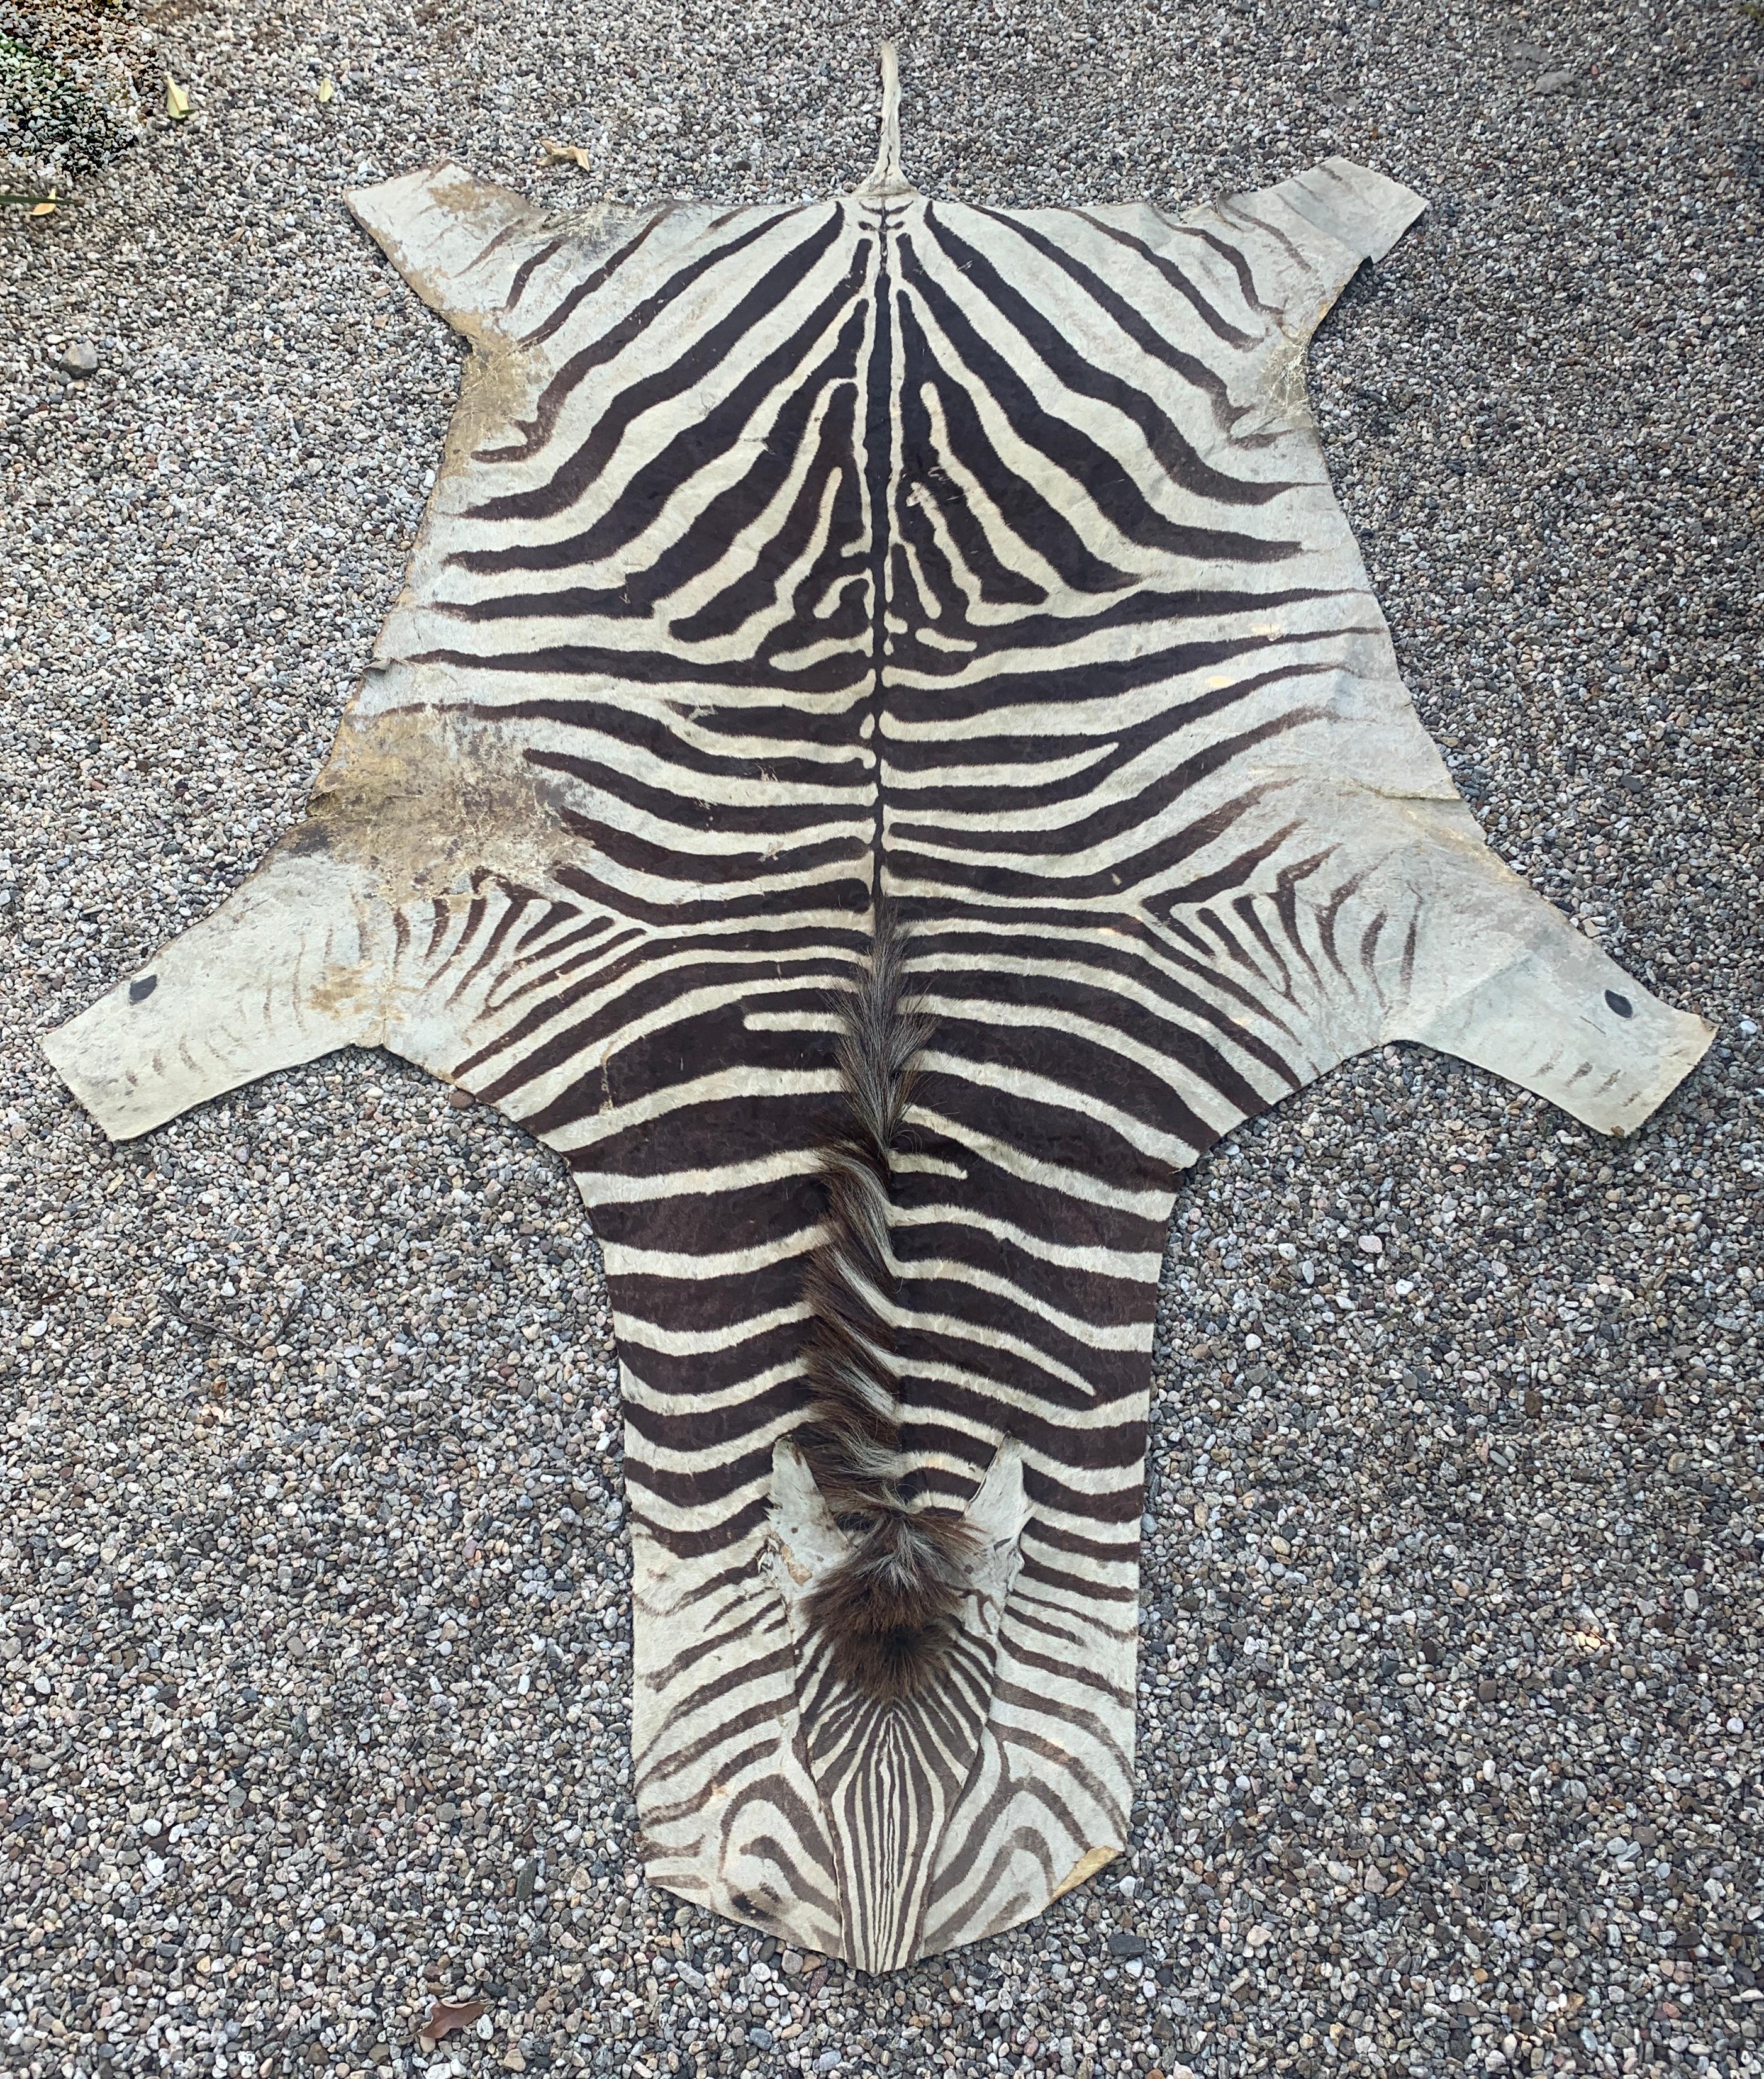 A vintage and well worn Zebra Hide rug. Buchelli Zebra from Botswana. The age and wear make this patinated piece wonderful. Zebra adds a sense of wild, eclectic personality to any room. The ethnic and organic lines speak volumes.